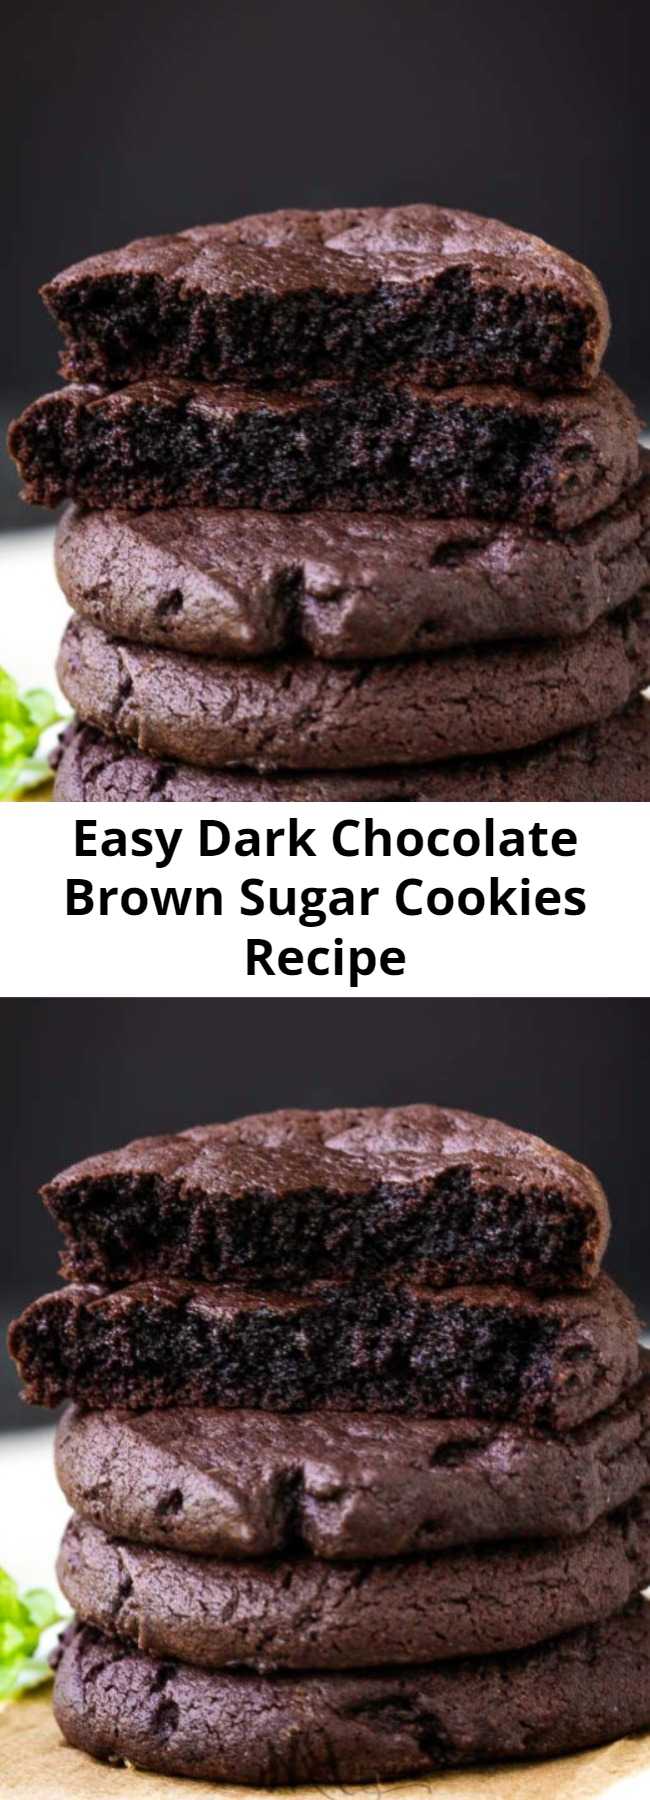 Easy Dark Chocolate Brown Sugar Cookies Recipe - Dark Chocolate Brown Sugar Cookies have the perfect chewy texture on the inside with just a bit of crisp on the outside. #darkchocolate #chocolate #cookies #easy #Oreo #recipes #chewy